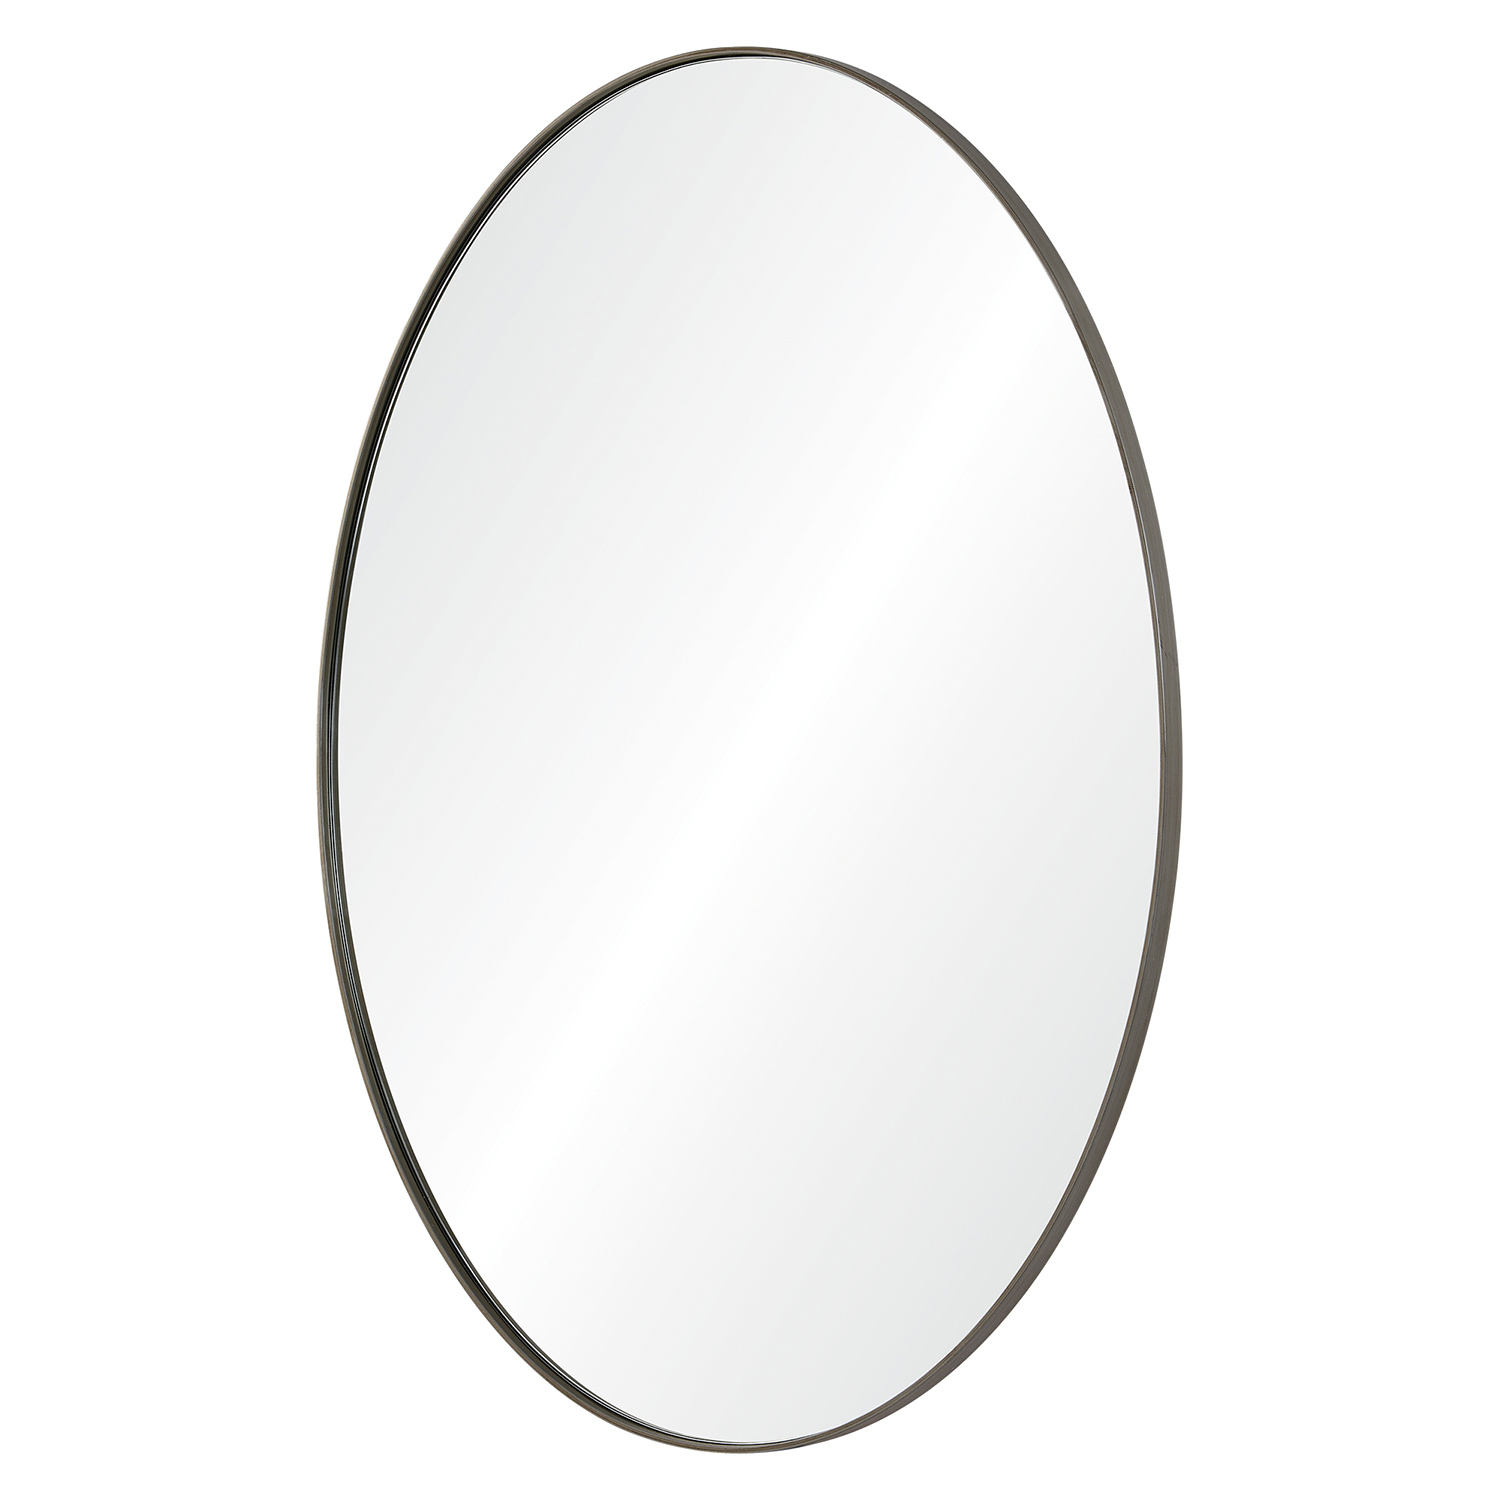 Ren-Wil Newport Oval Mirror - Antique Brushed Silver